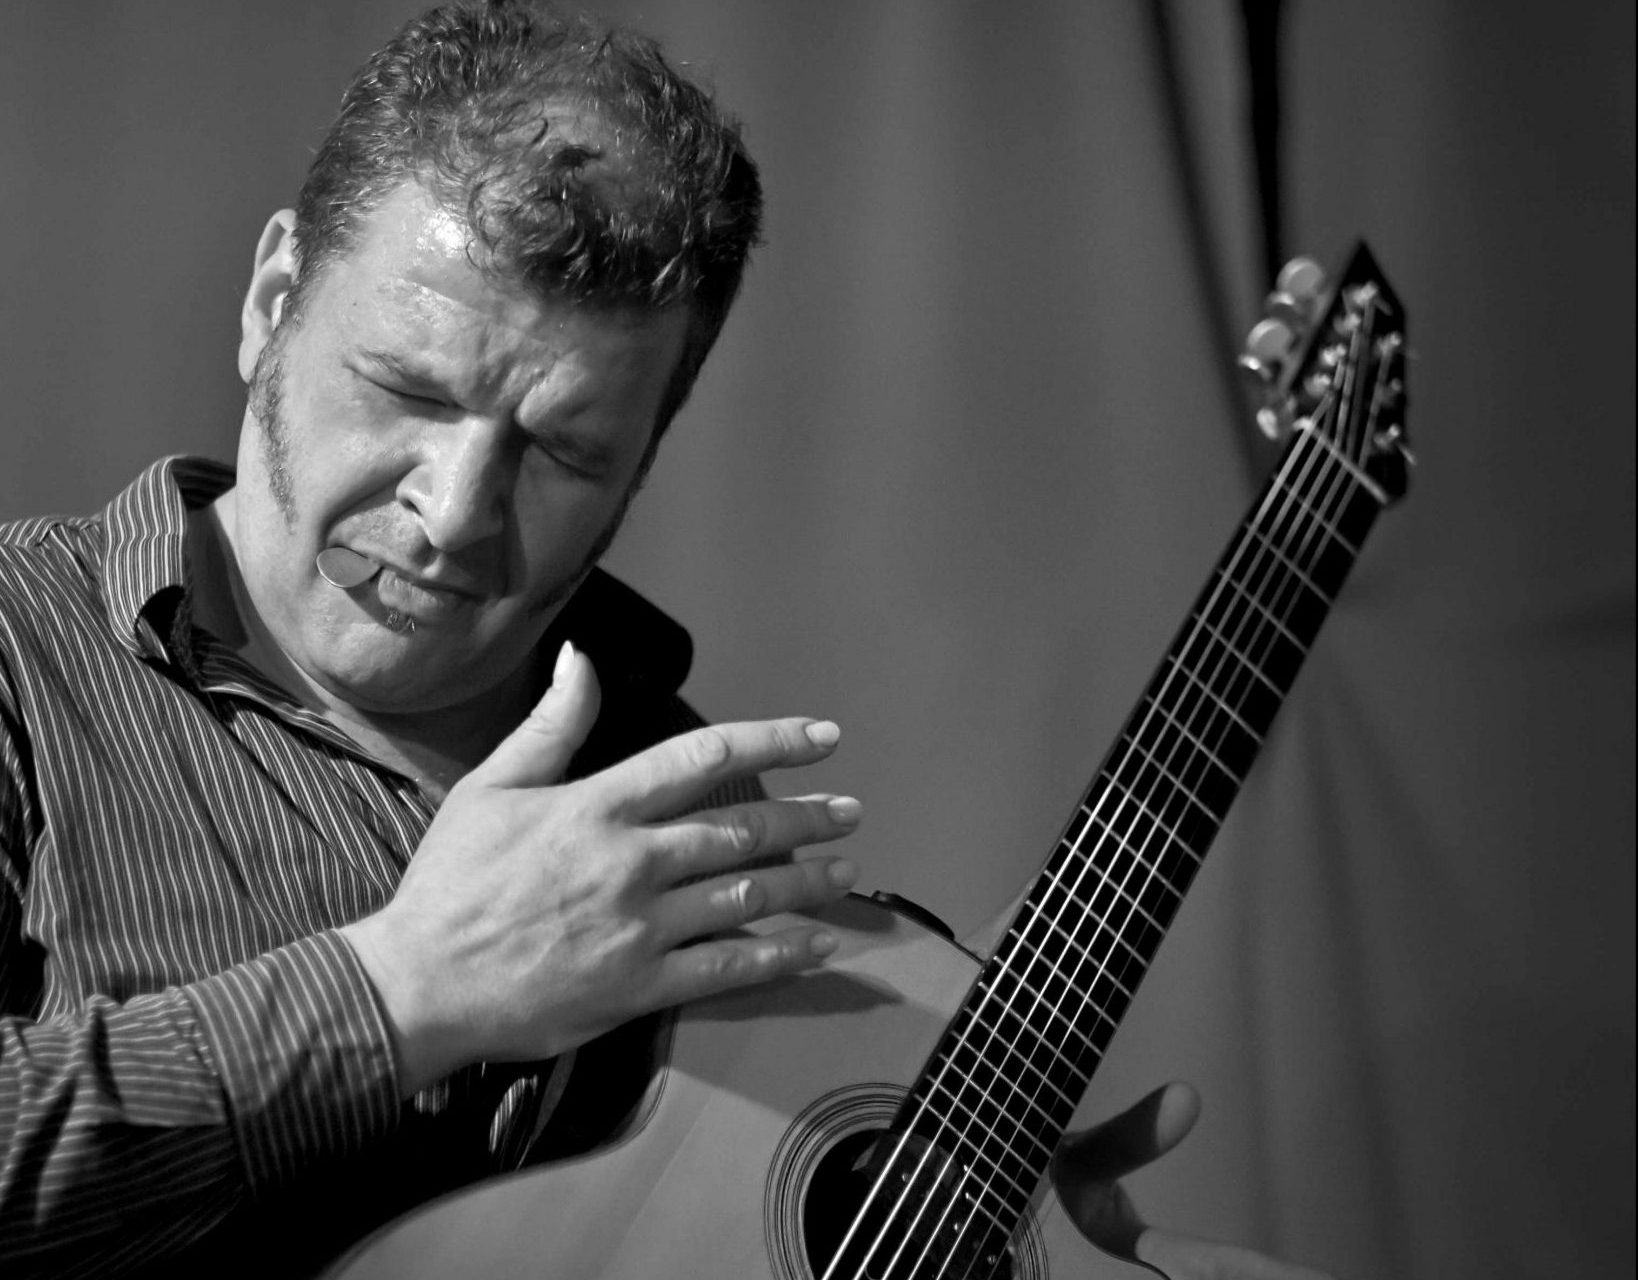 You are currently viewing Solo Guitar, Andreas Brunn @ Jazzlights